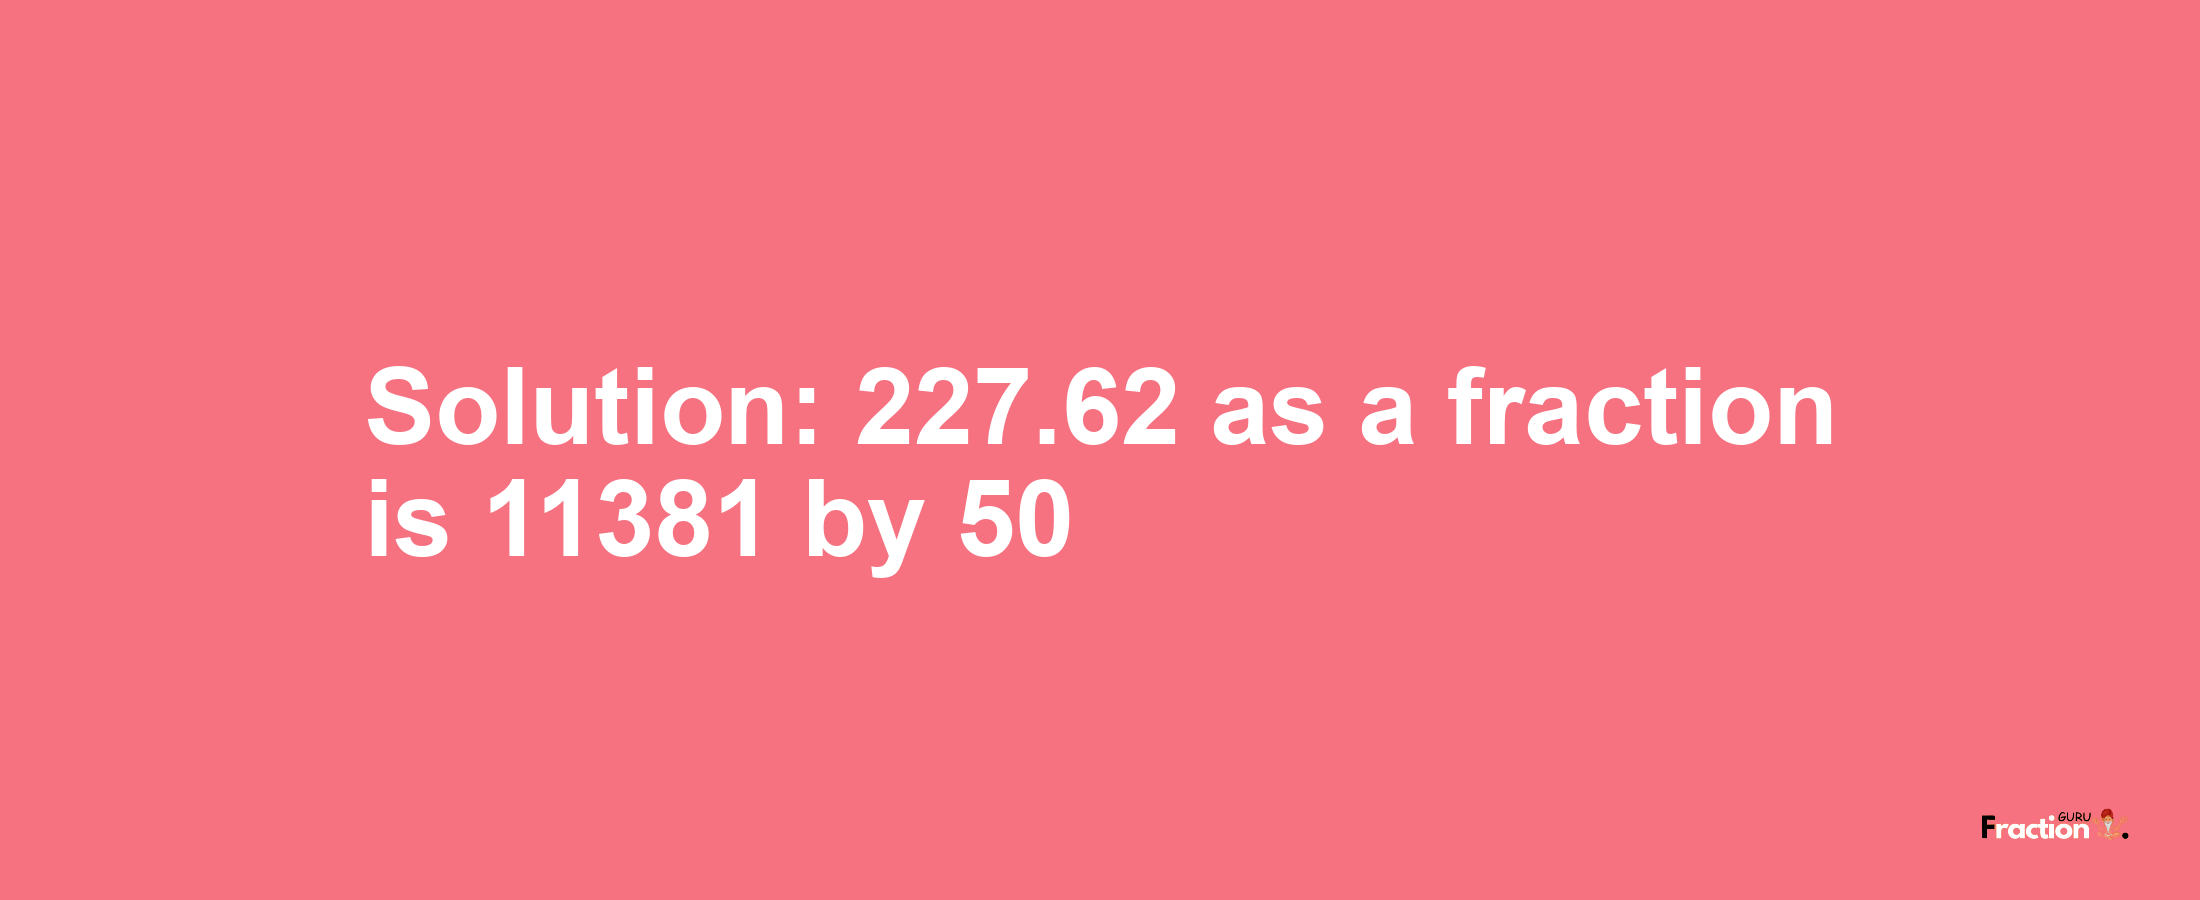 Solution:227.62 as a fraction is 11381/50